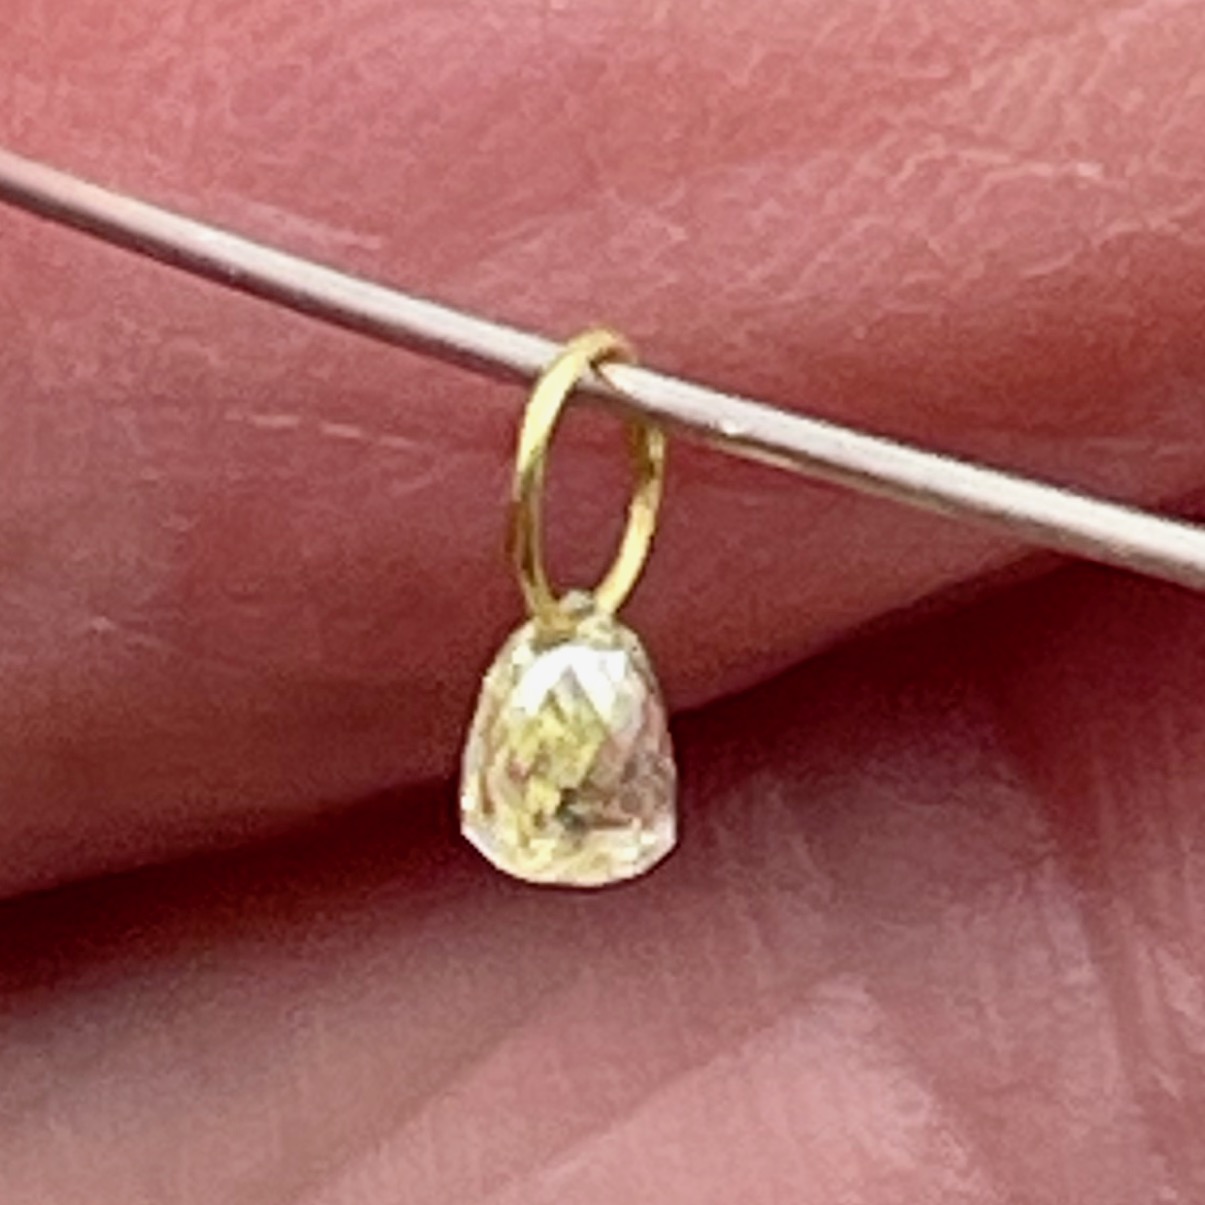 0.23cts Natural Canary Diamond 18K Gold Pendant | 3x2.5x2.25mm | - image 5 of 12